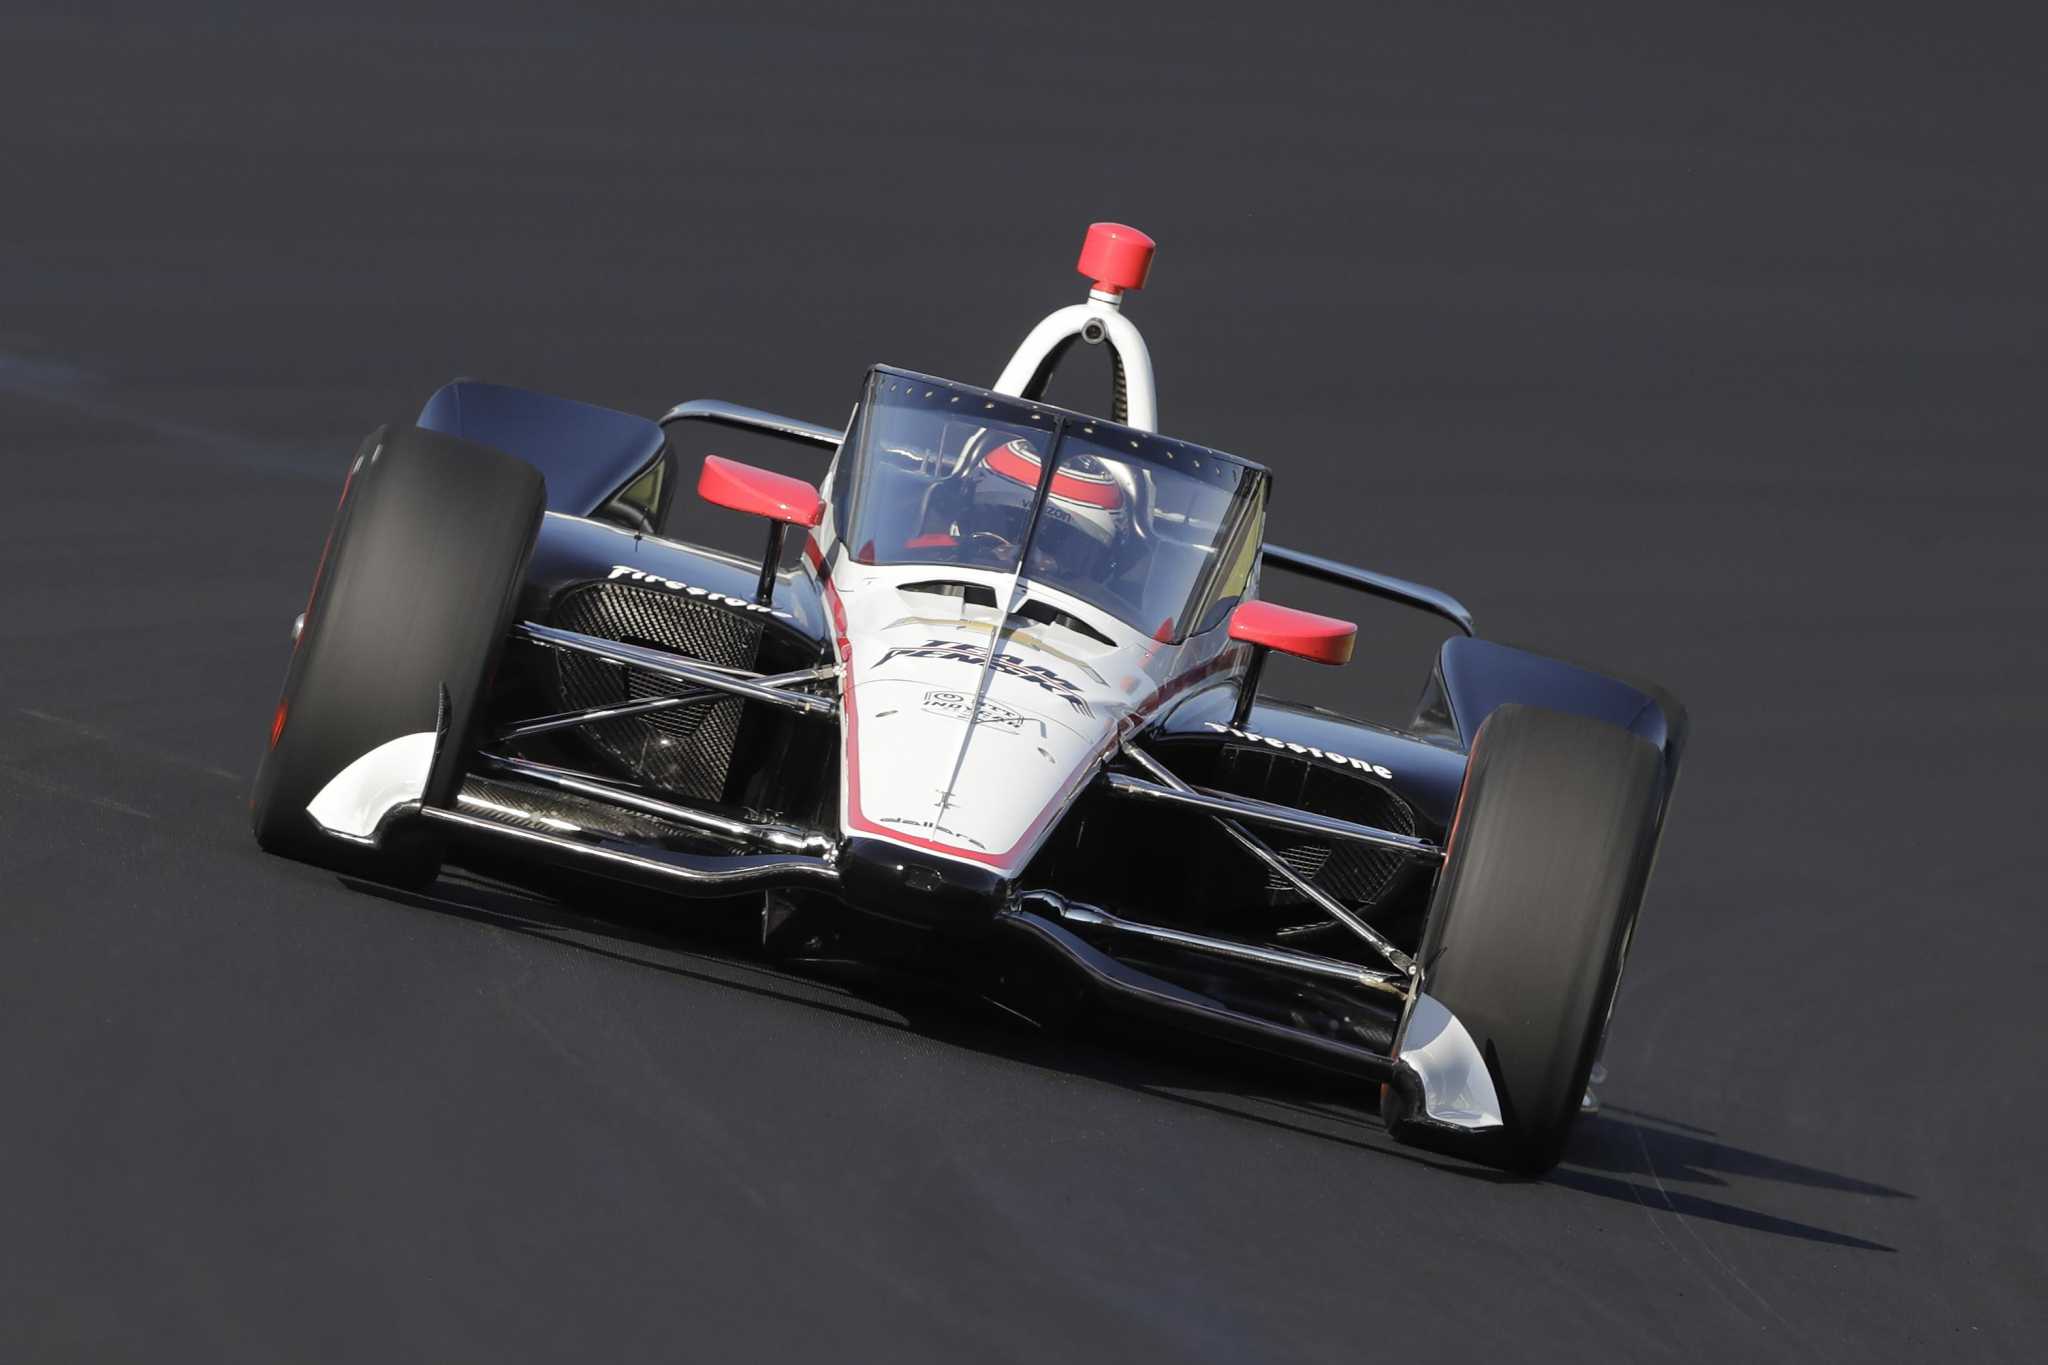 IndyCar retuns to racing at Texas Motor Speedway with a new look for safety